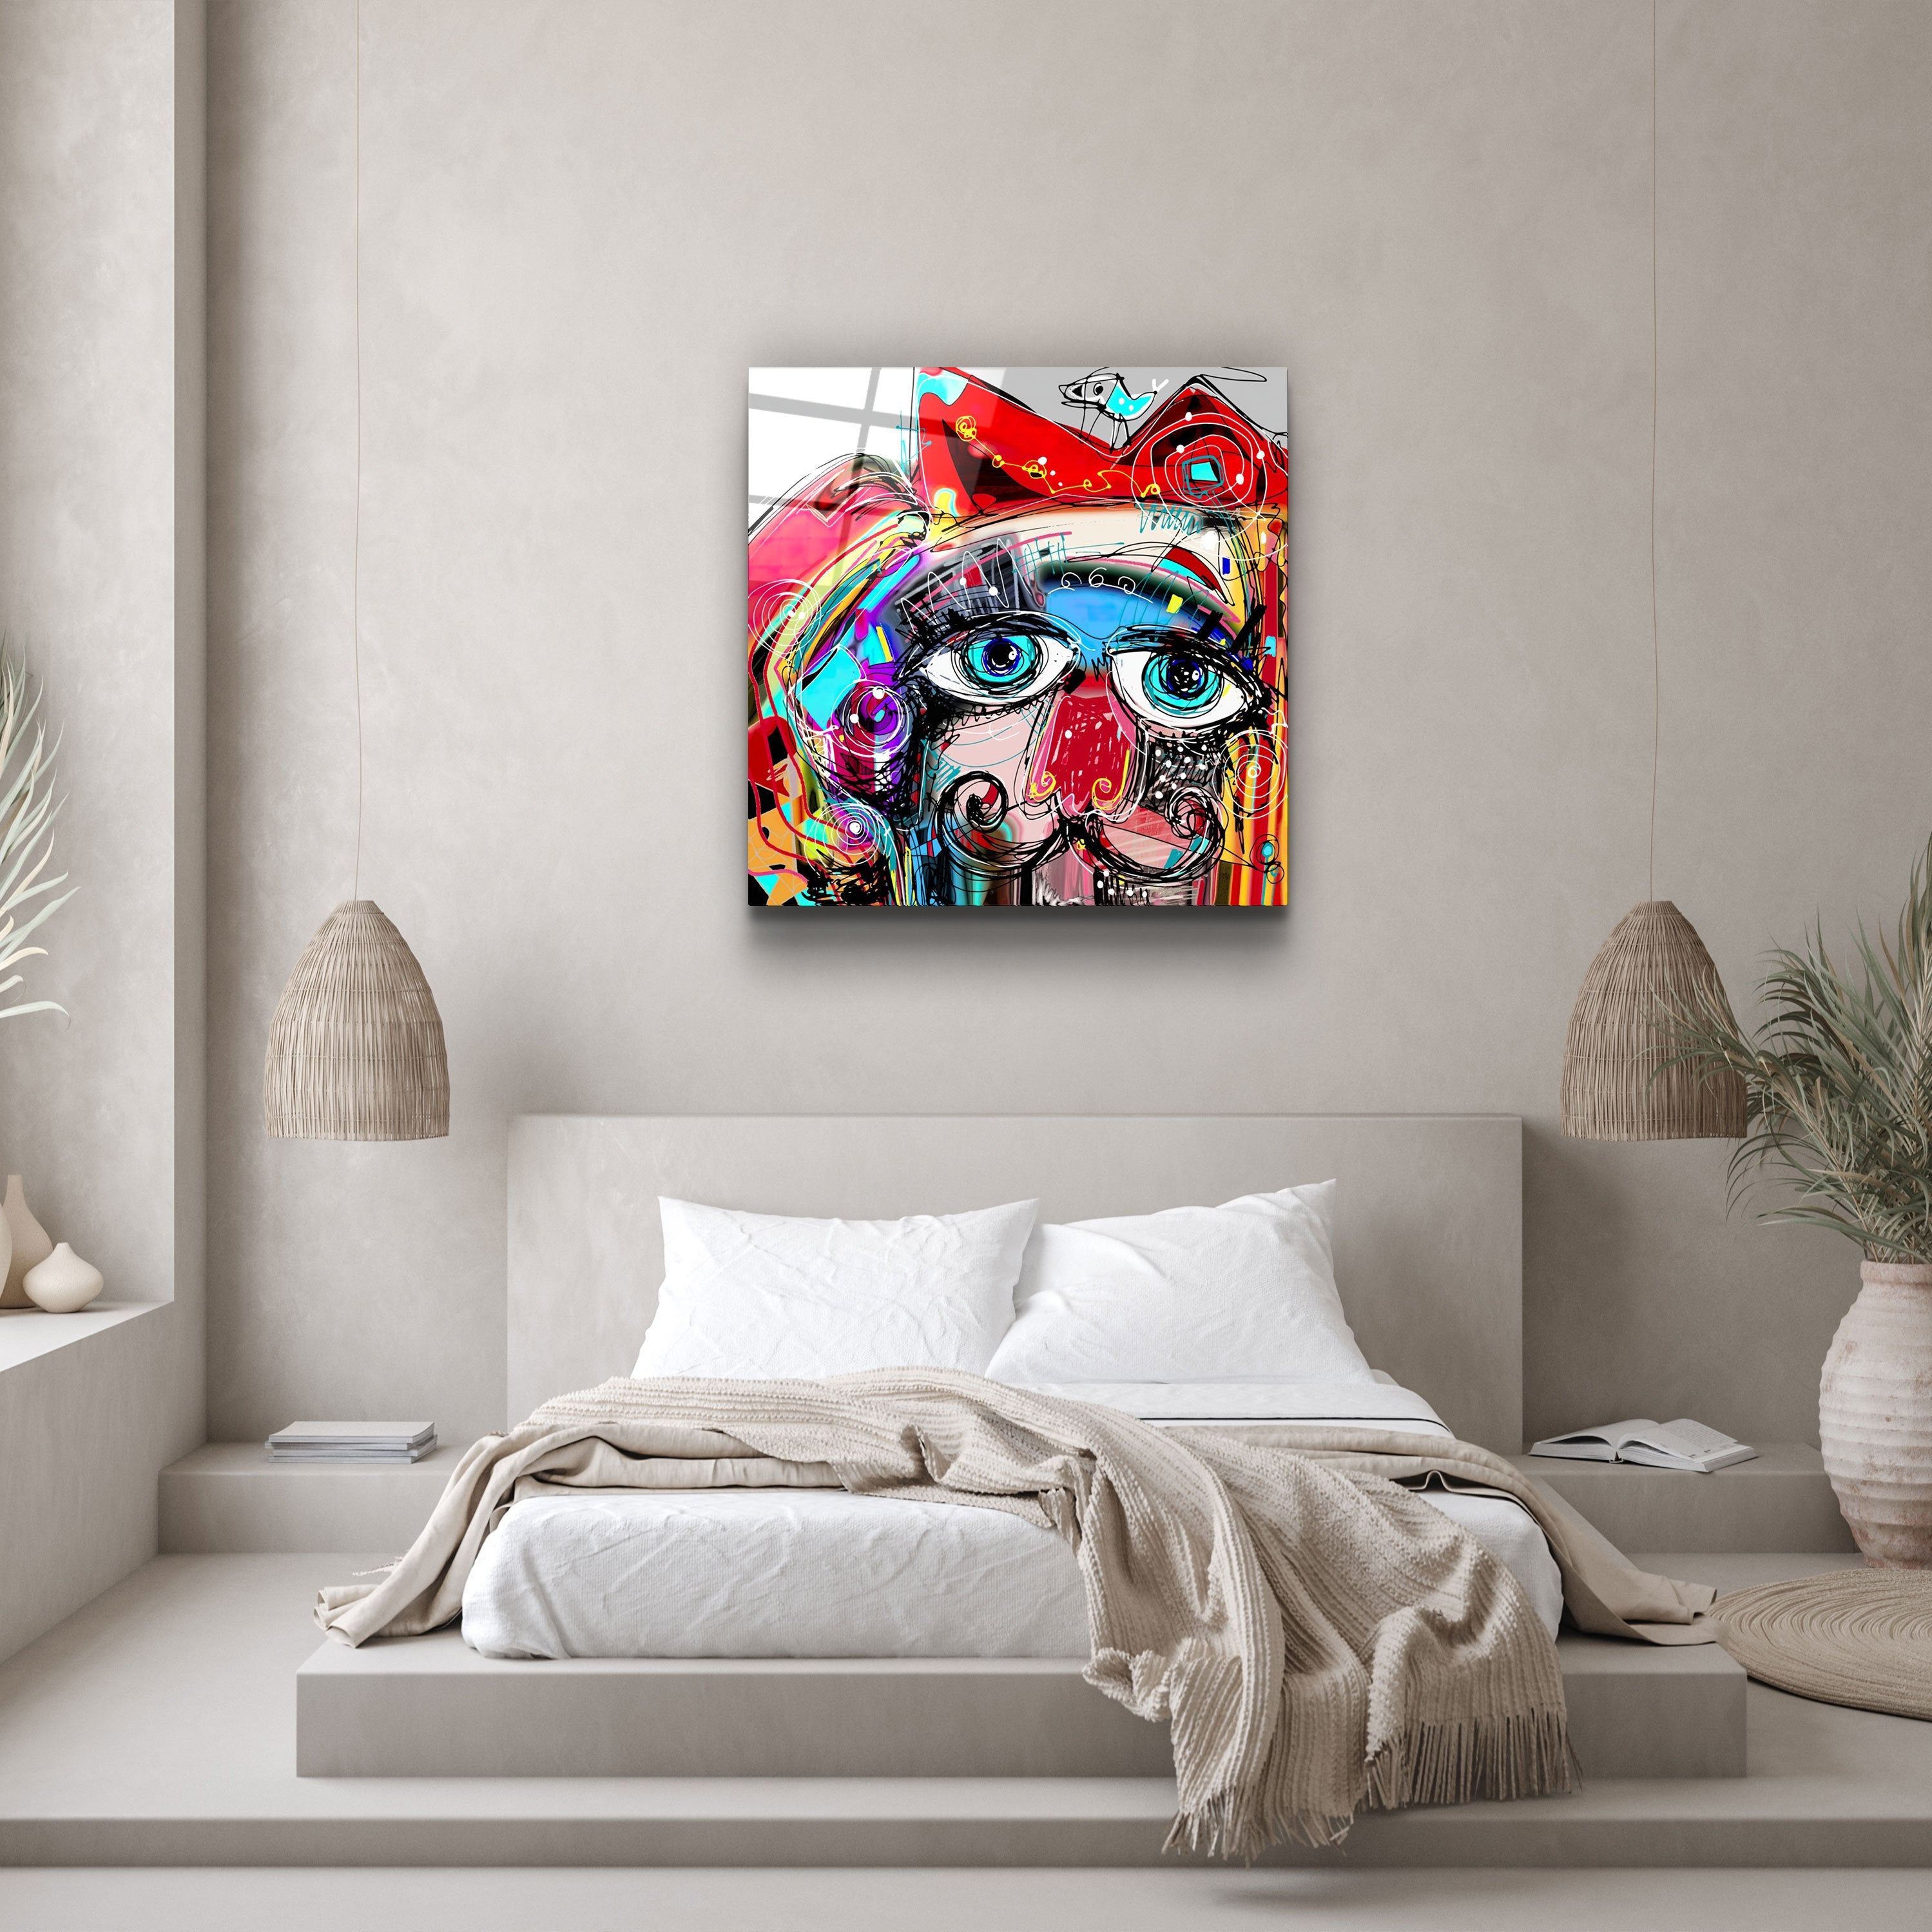 ・"Abstract Colorful Portrait"・Glass Wall Art